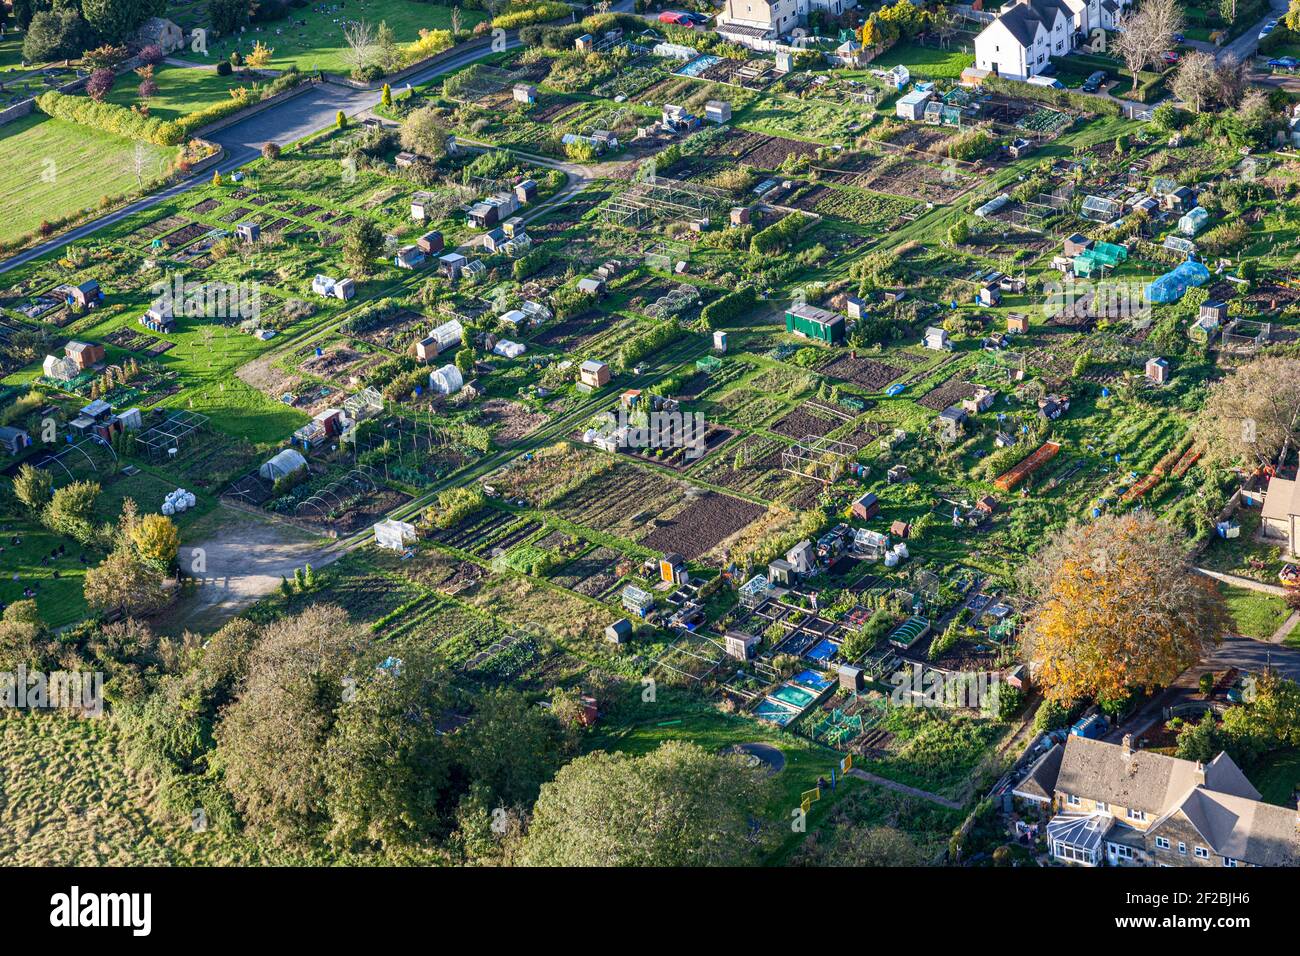 An aerial view of garden allotments in the Cotswold town of Stow on the Wold, Gloucestershire, UK Stock Photo